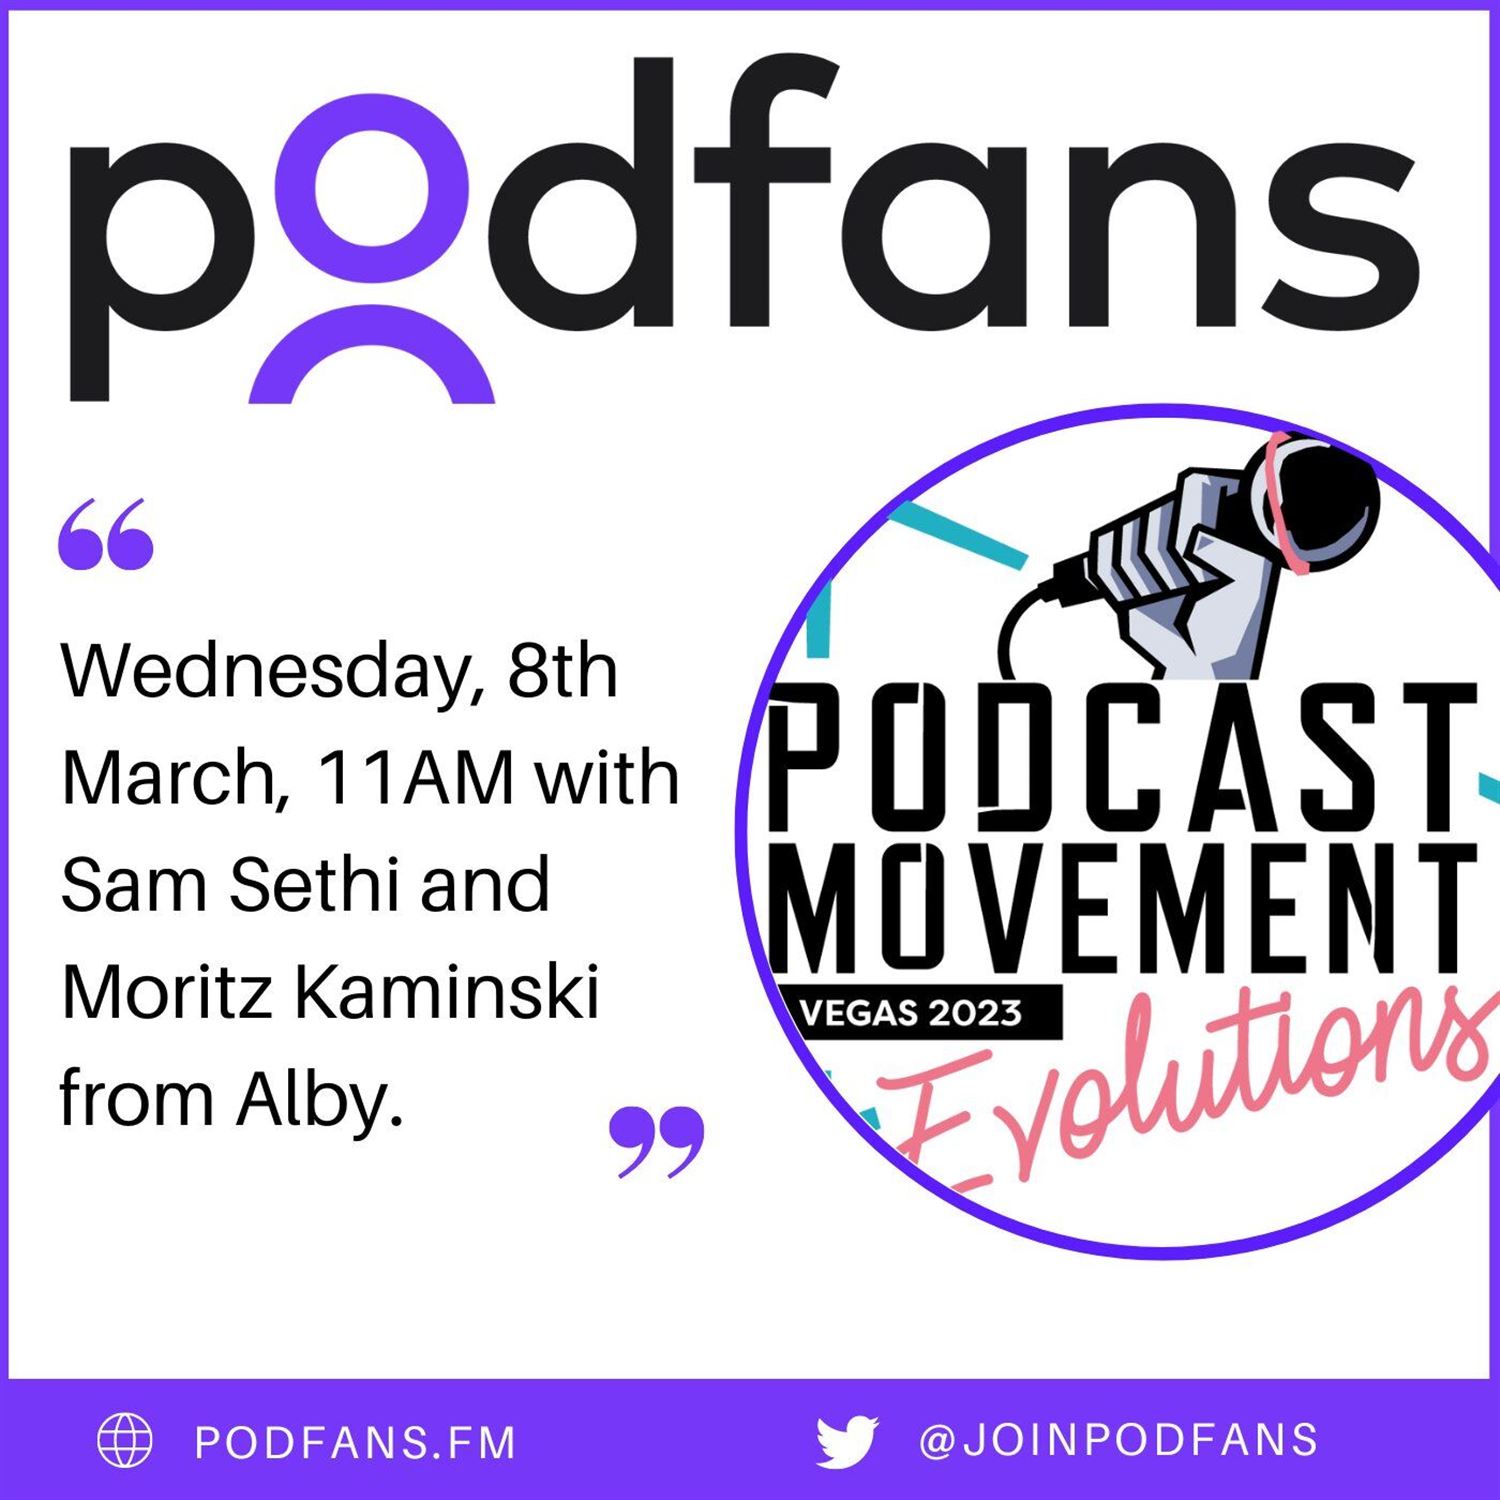 What is Podfans?